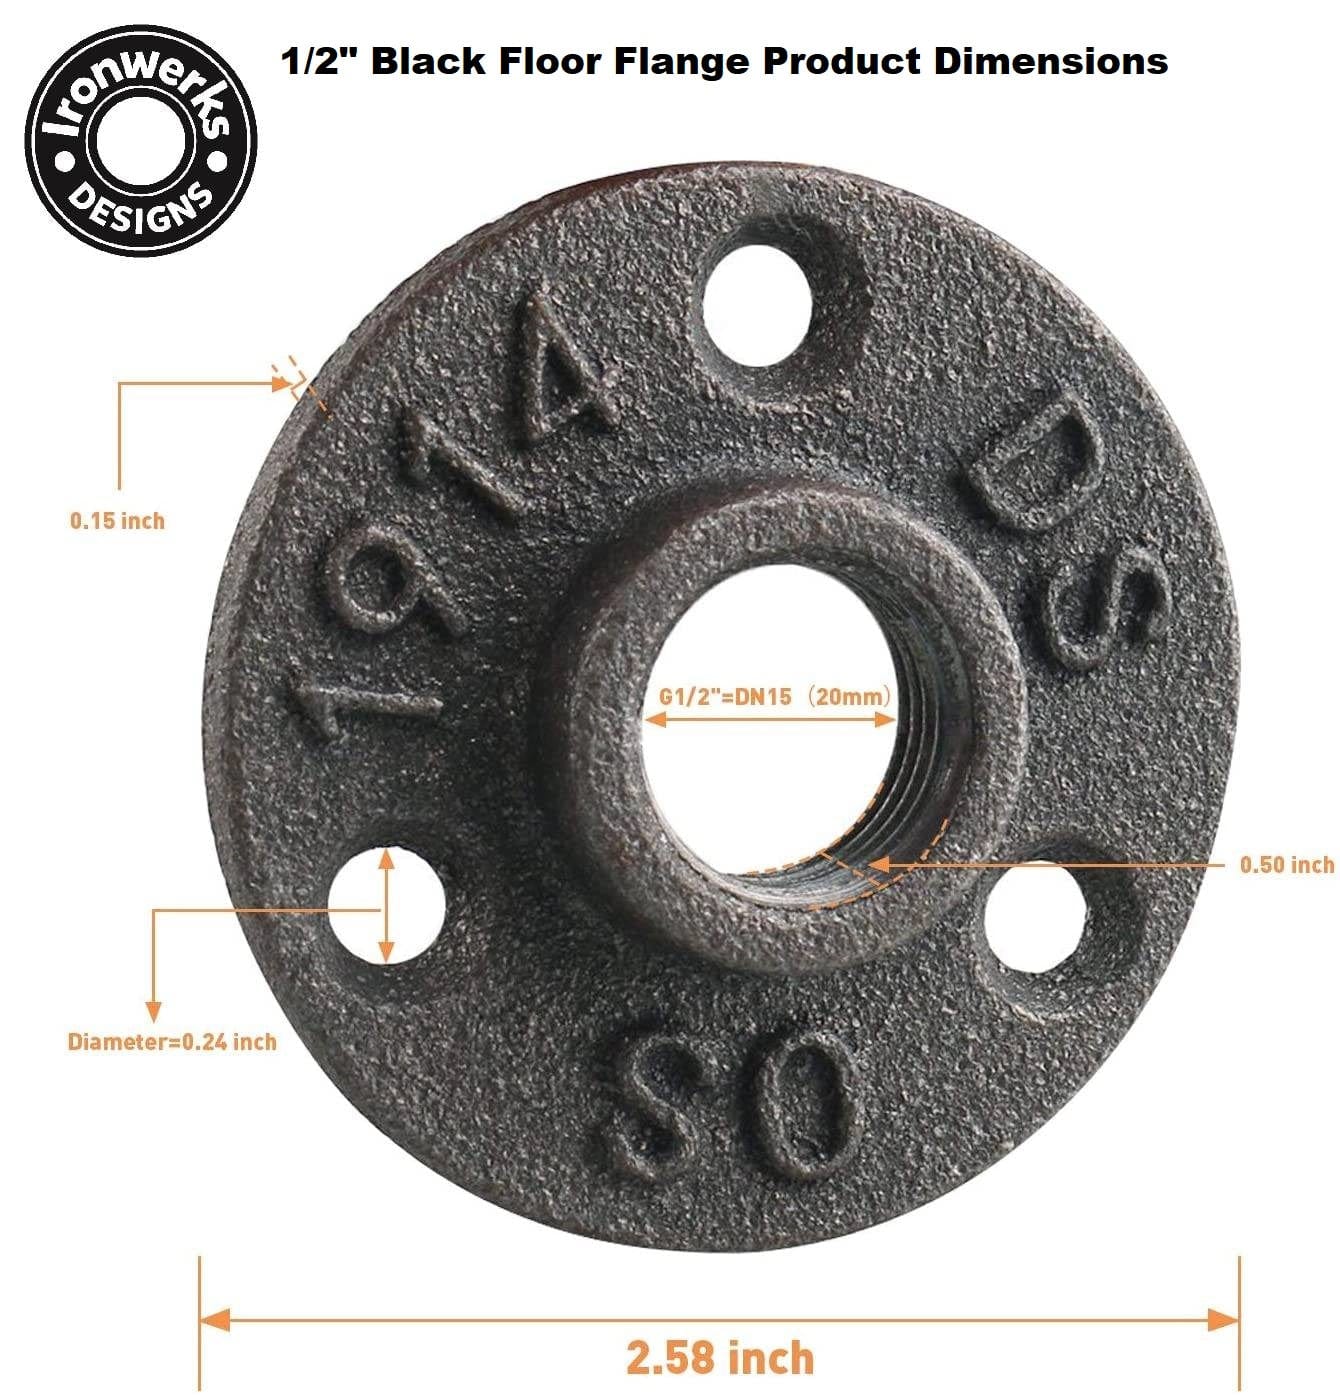 1/2" Black Floor Flange For Pipe Furniture - 3 Hole - Box of 500